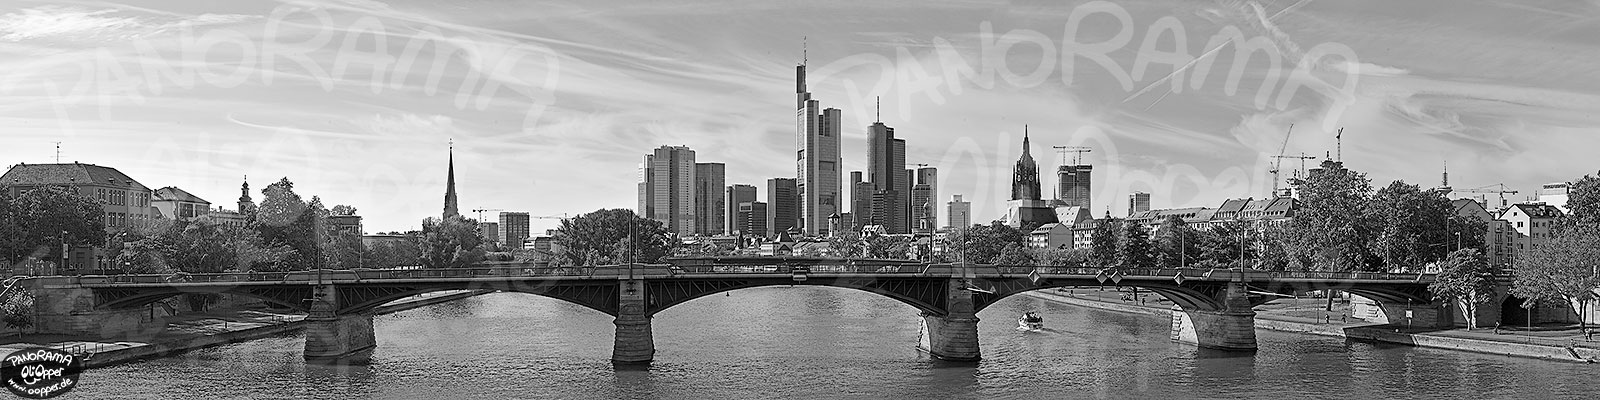 Panorama Frankfurt - Skyline am Tag - p8299 - (c) by Oliver Opper